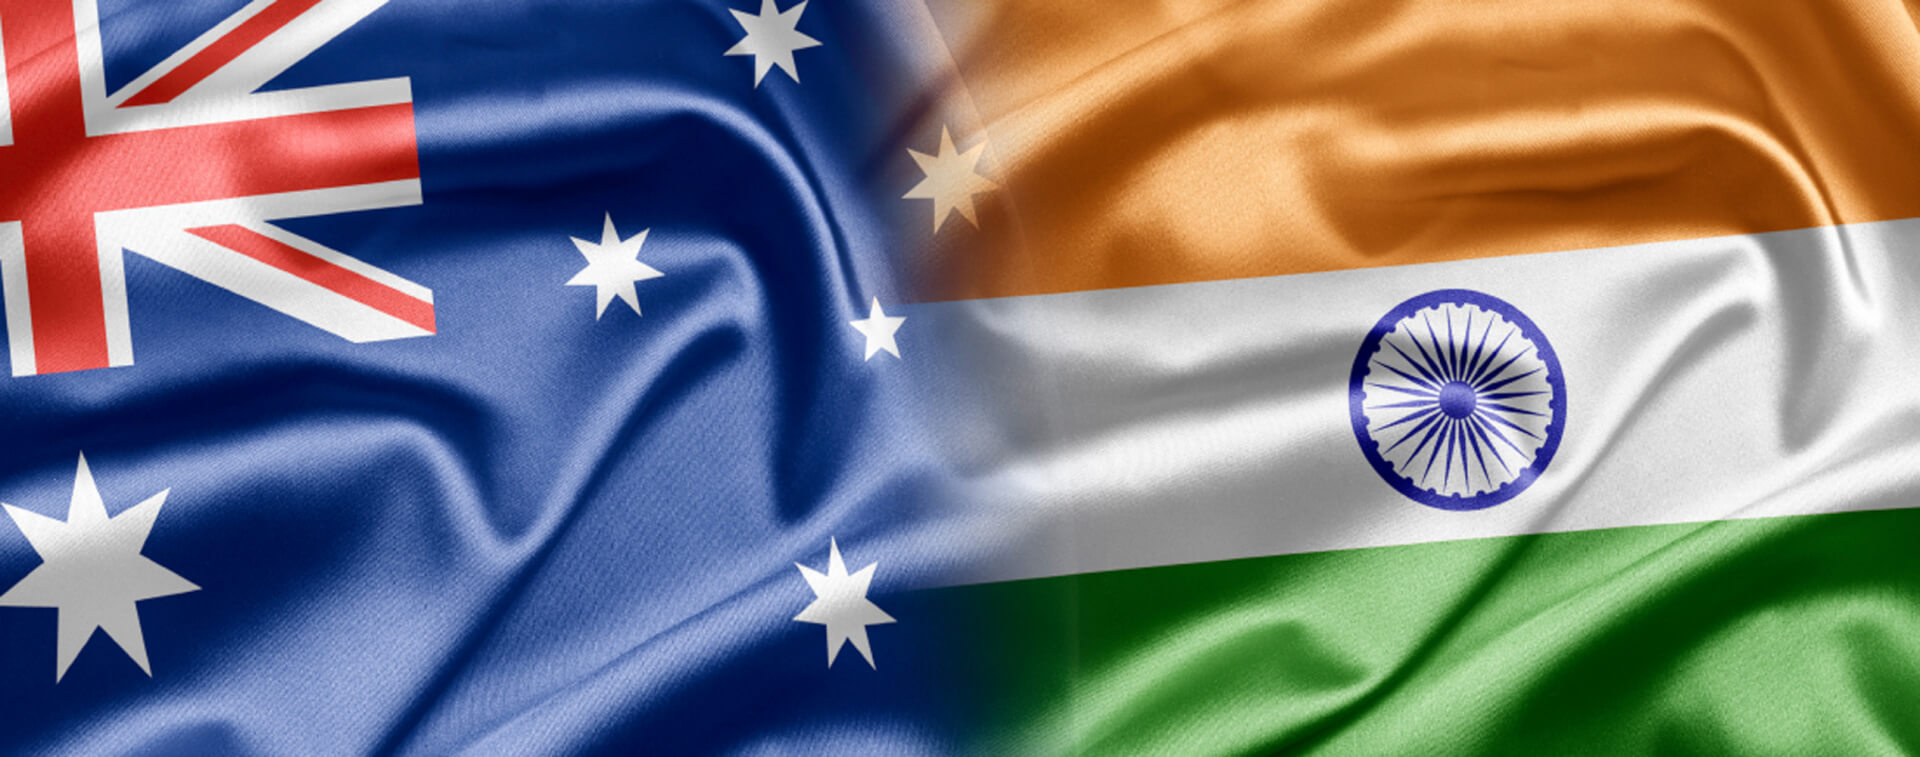 Joint Statement: Republic of India and Australia (June 4, 2020)